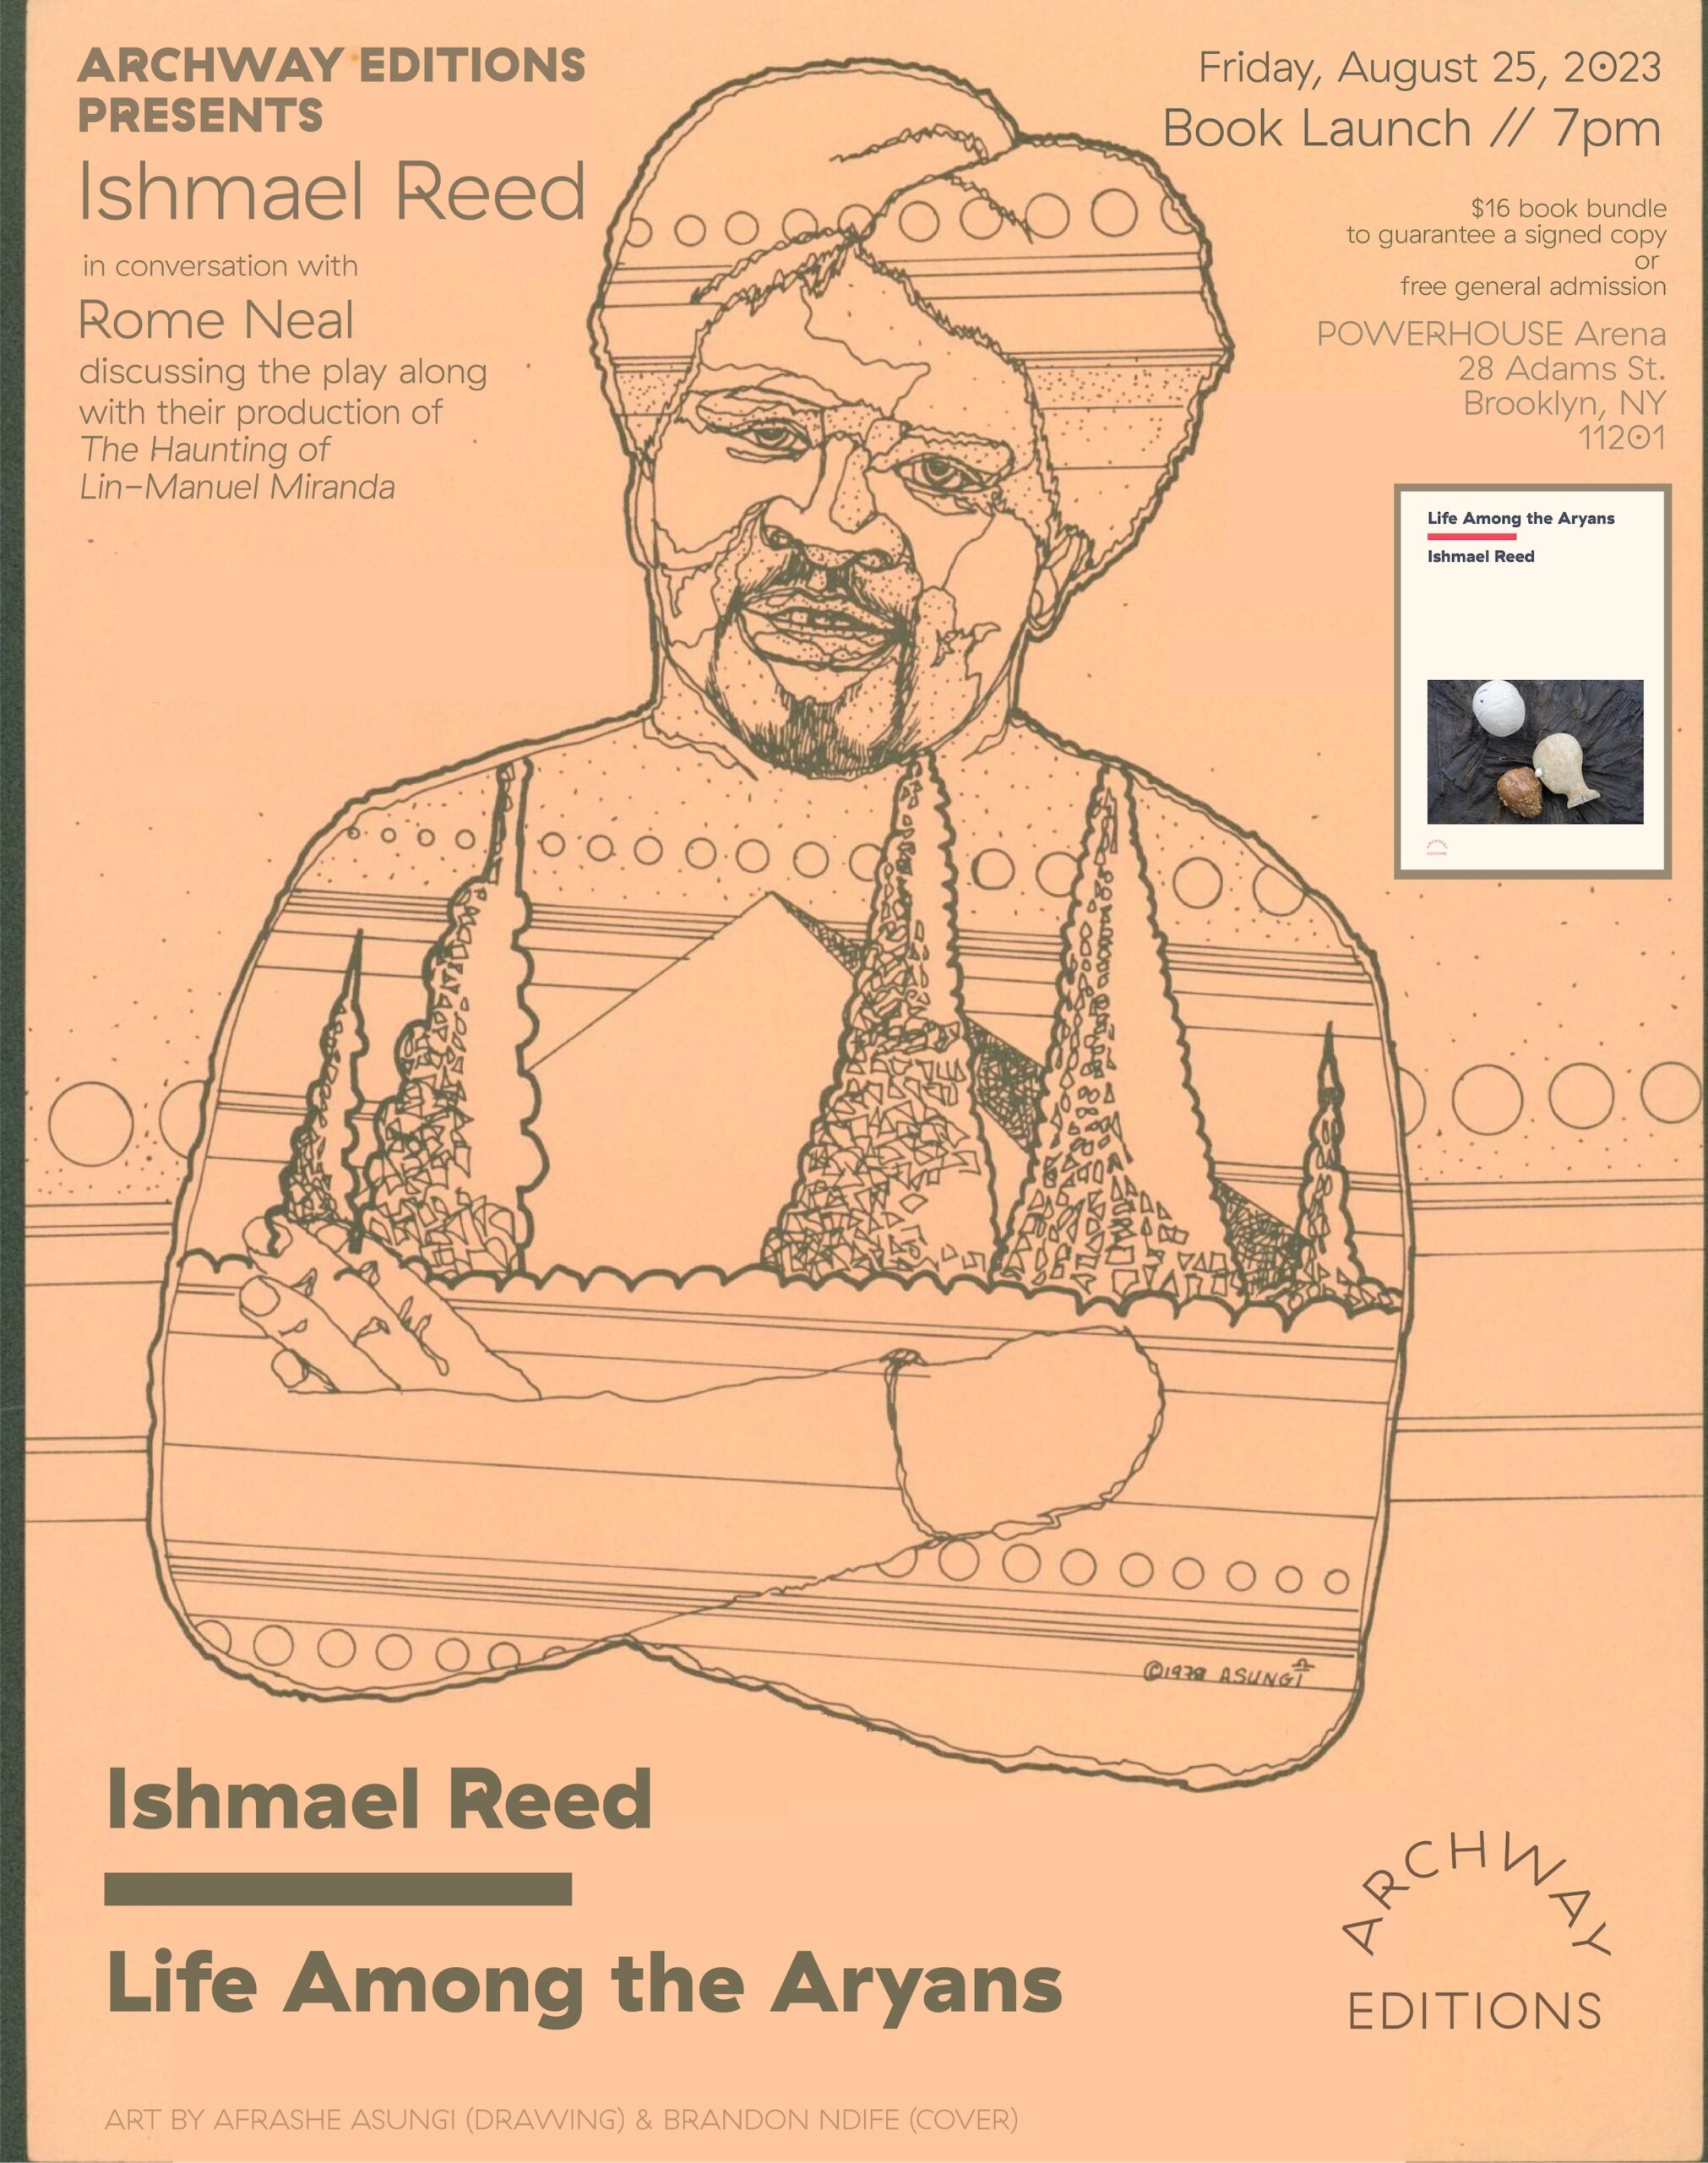 ARCHWAY EDITIONS presents the launch of LIFE AMONG THE ARYANS by Ishmael Reed in conversation with Rome Neal